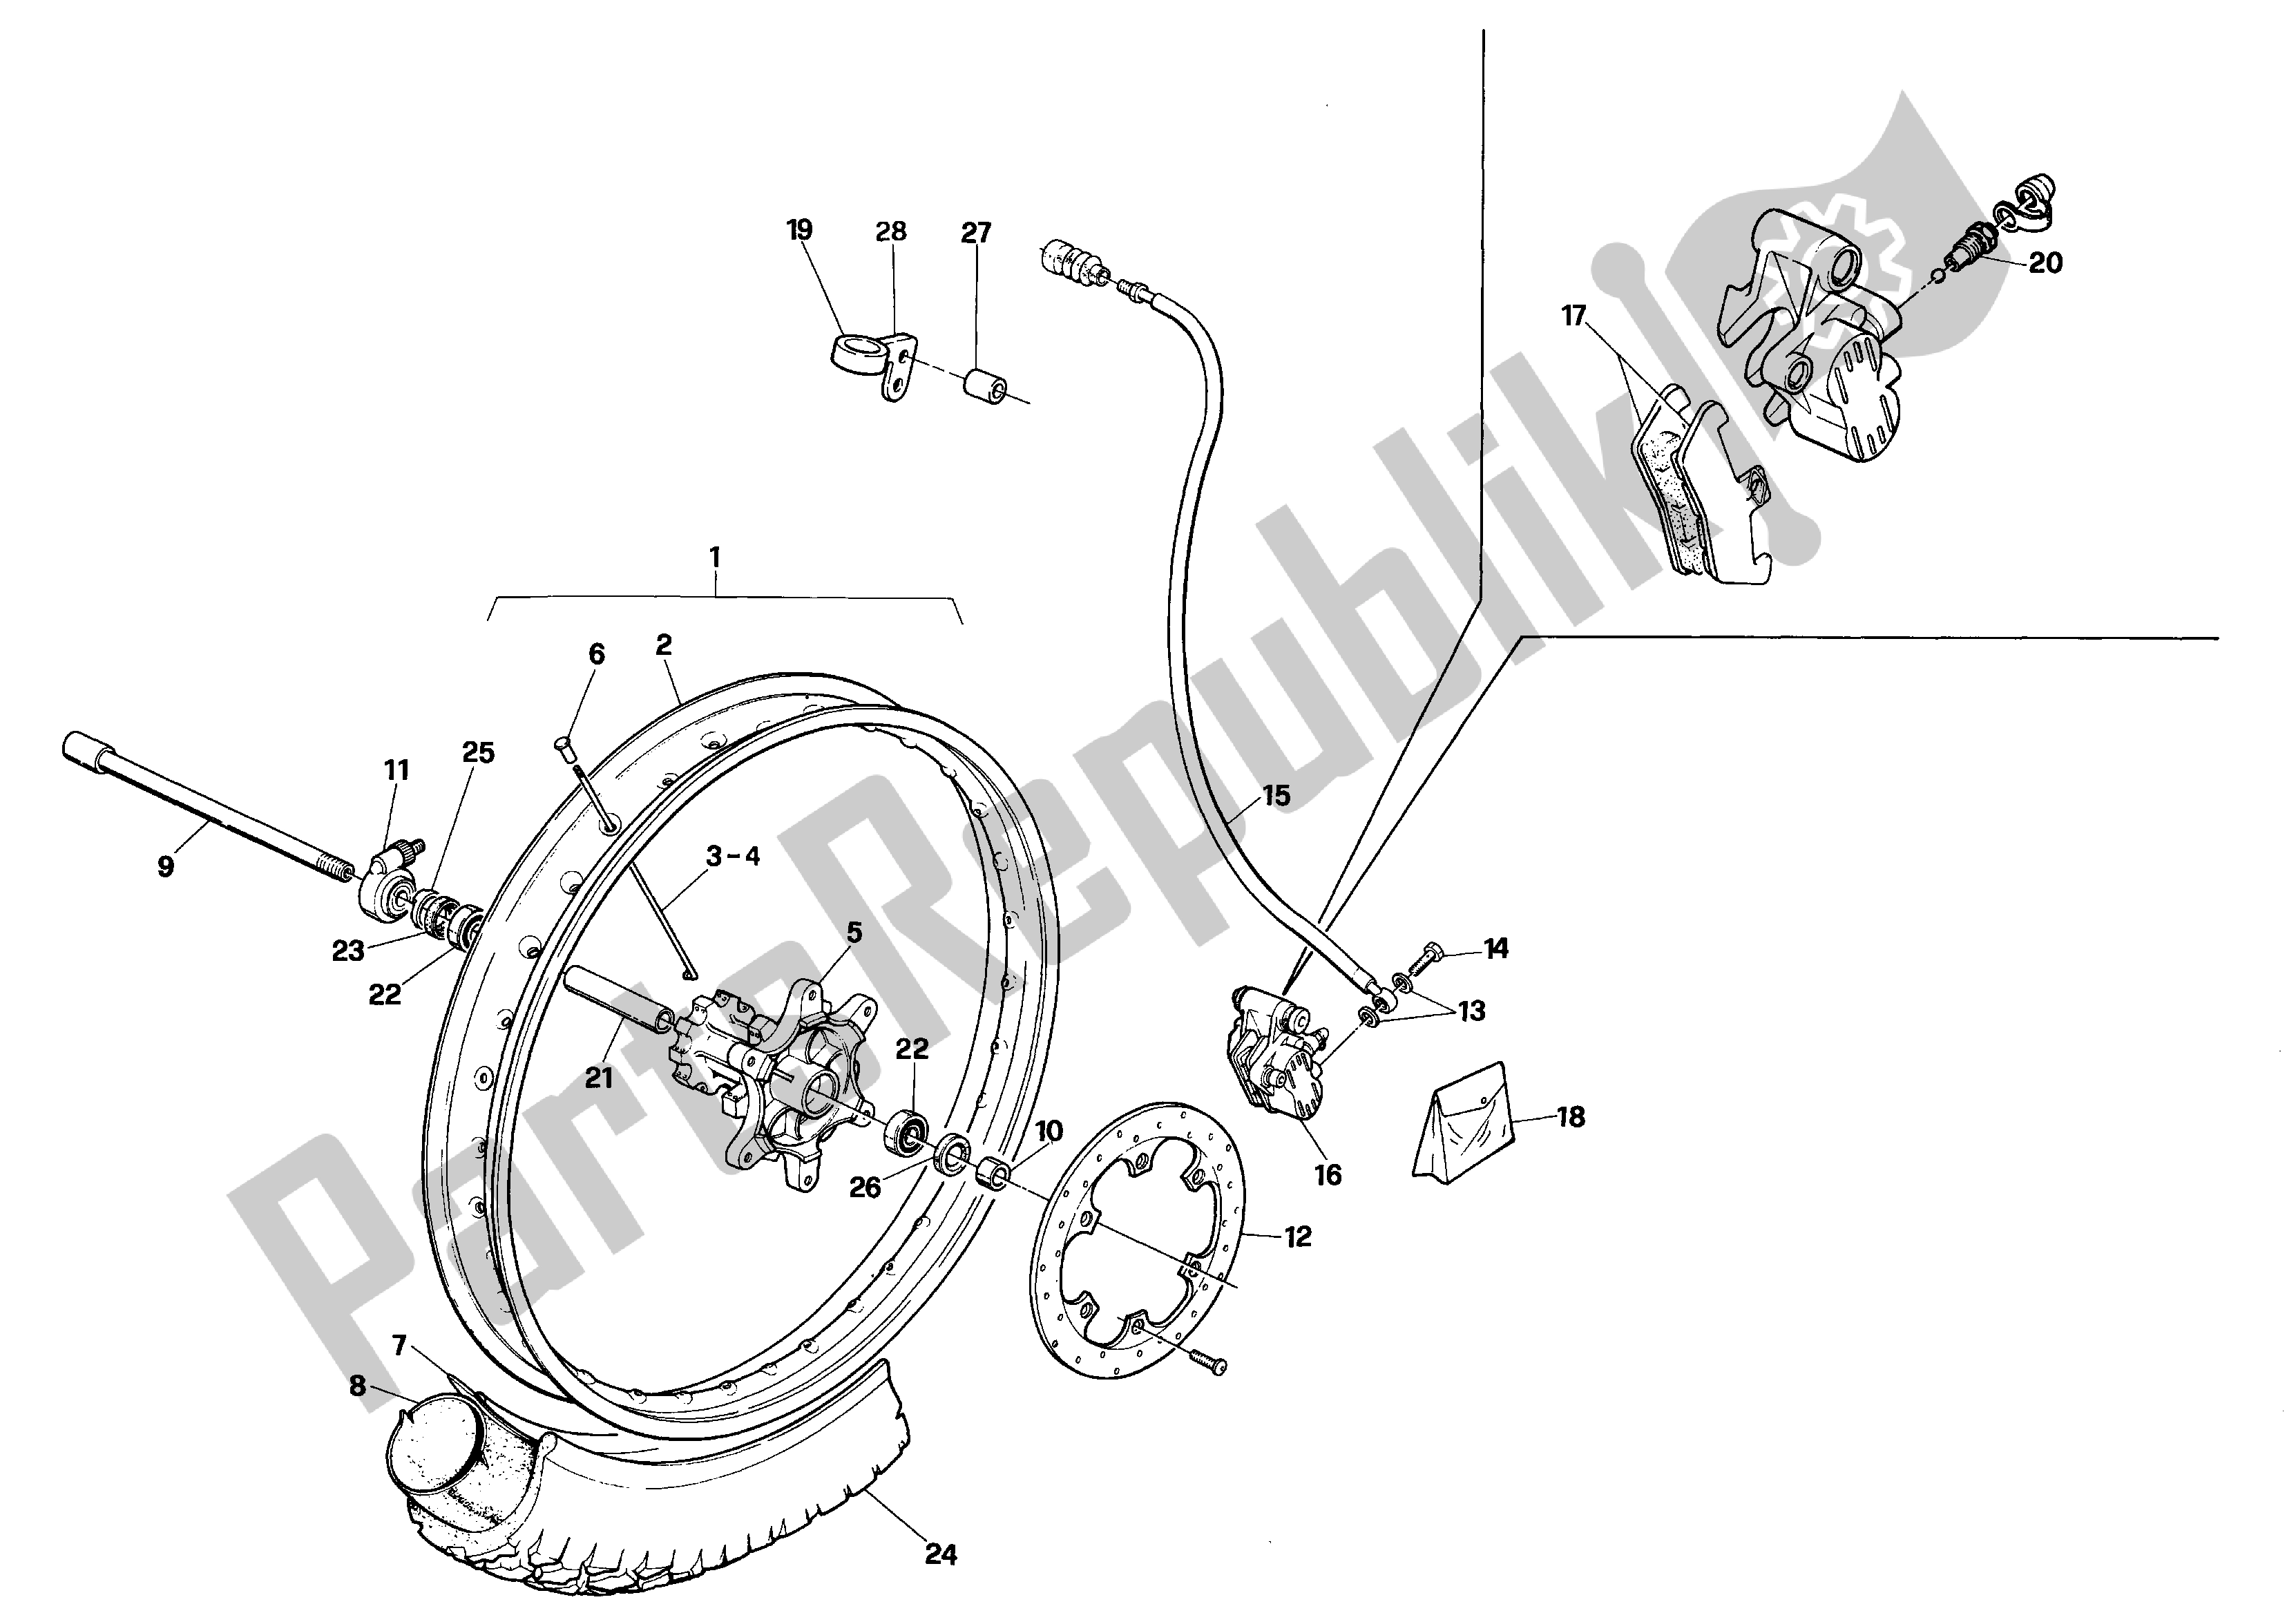 All parts for the Front Wheel of the Aprilia RX 125 1989 - 1993